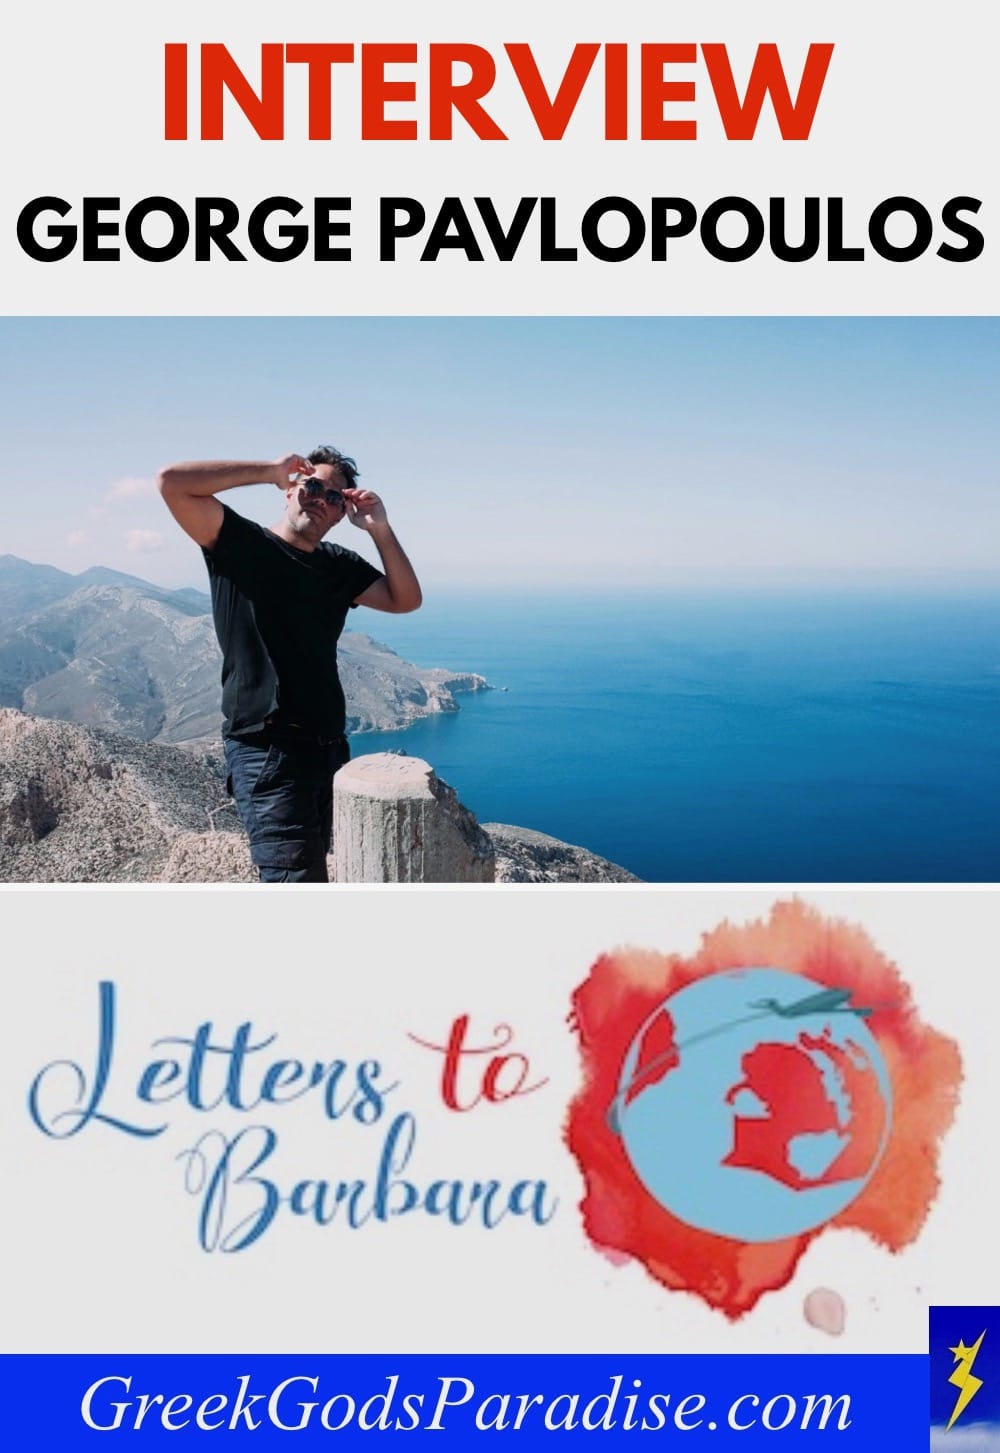 Interview George Pavlopoulos Letters to Barbara